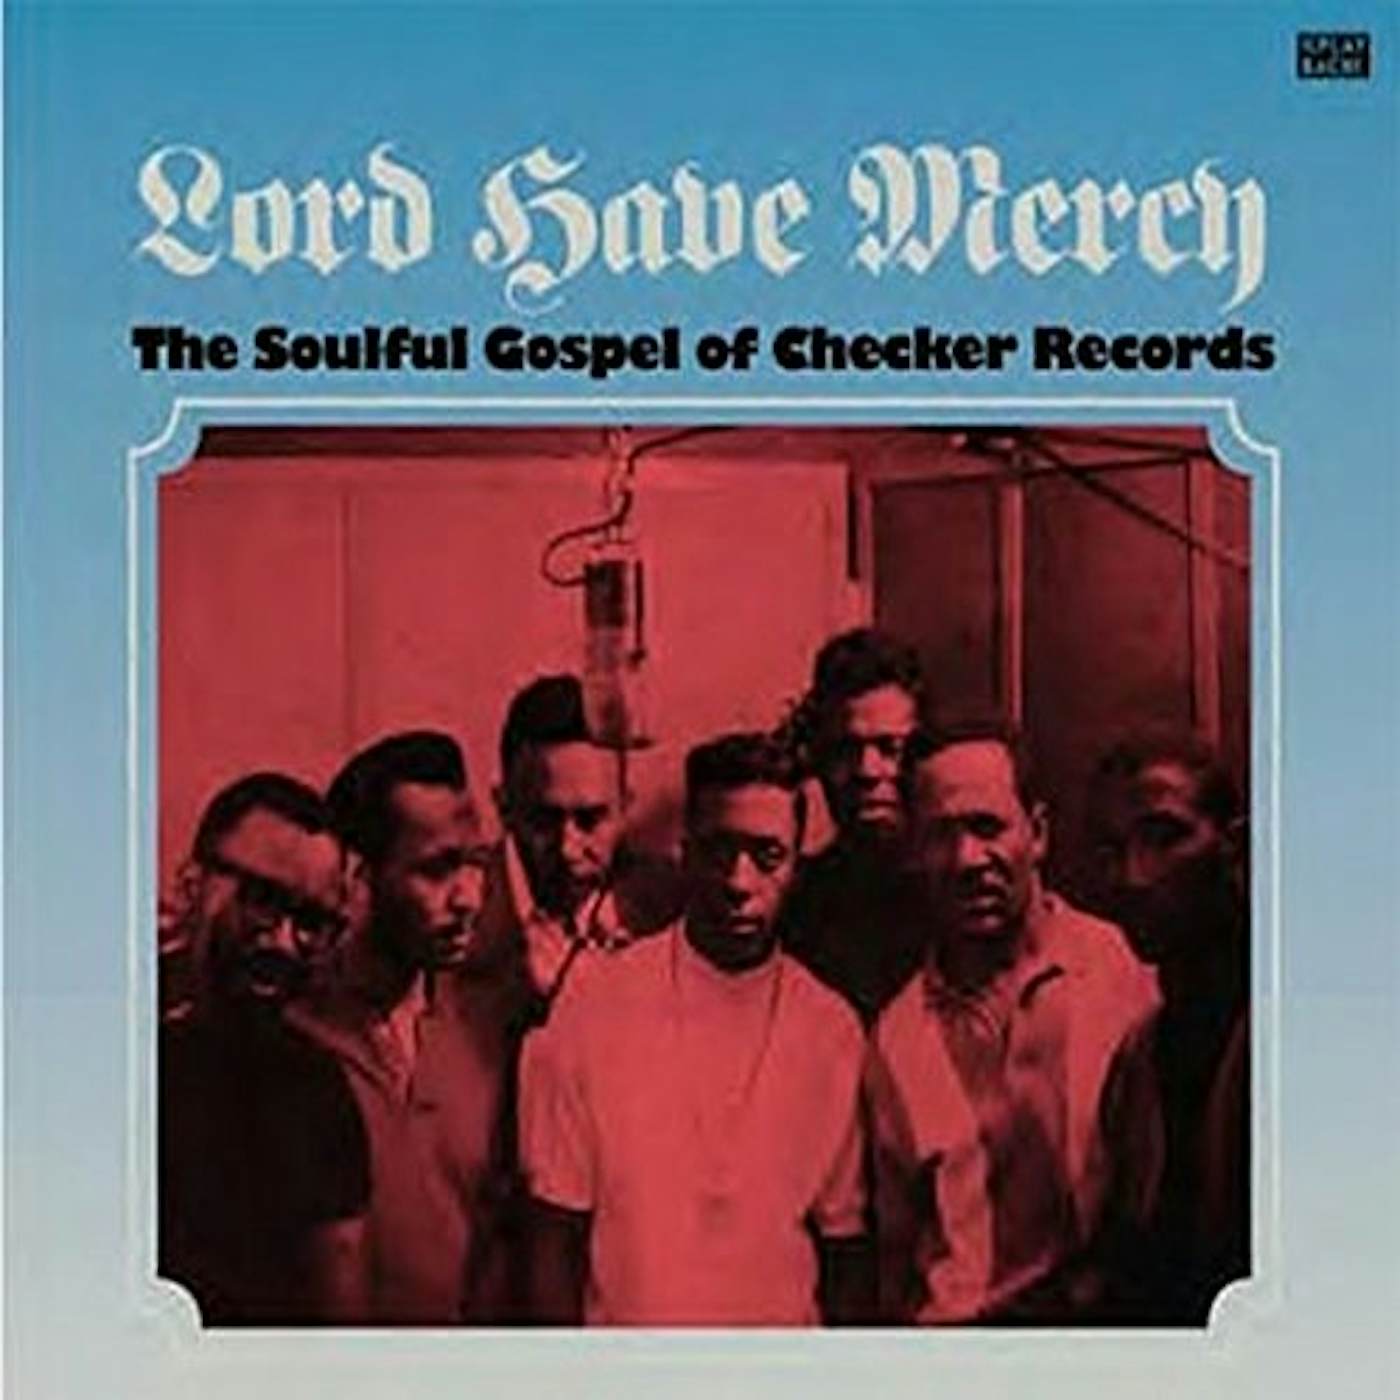 LORD HAVE MERCY / VARIOUS CD